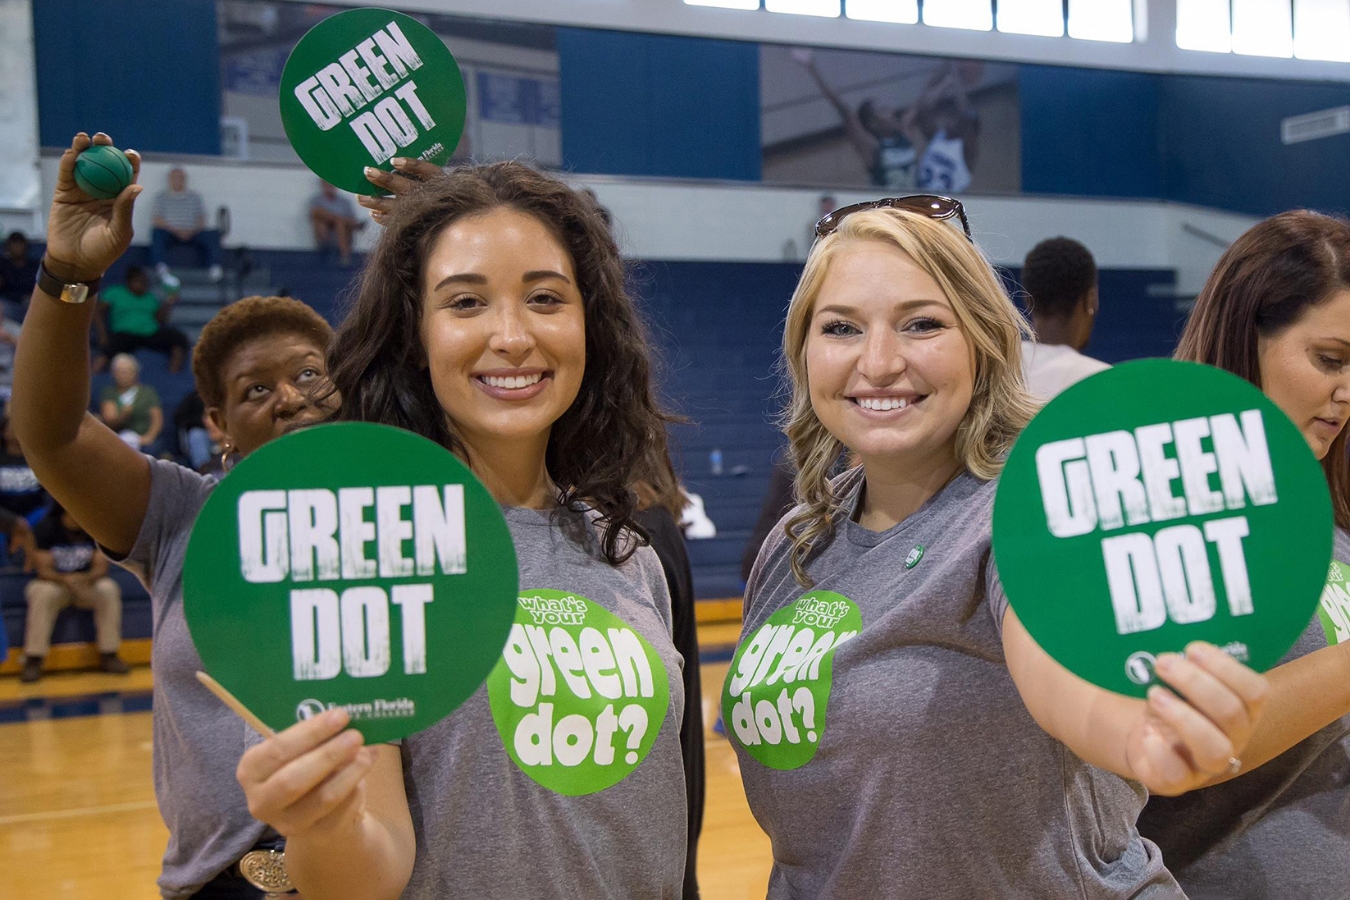 Two people holding up Green Dot signs